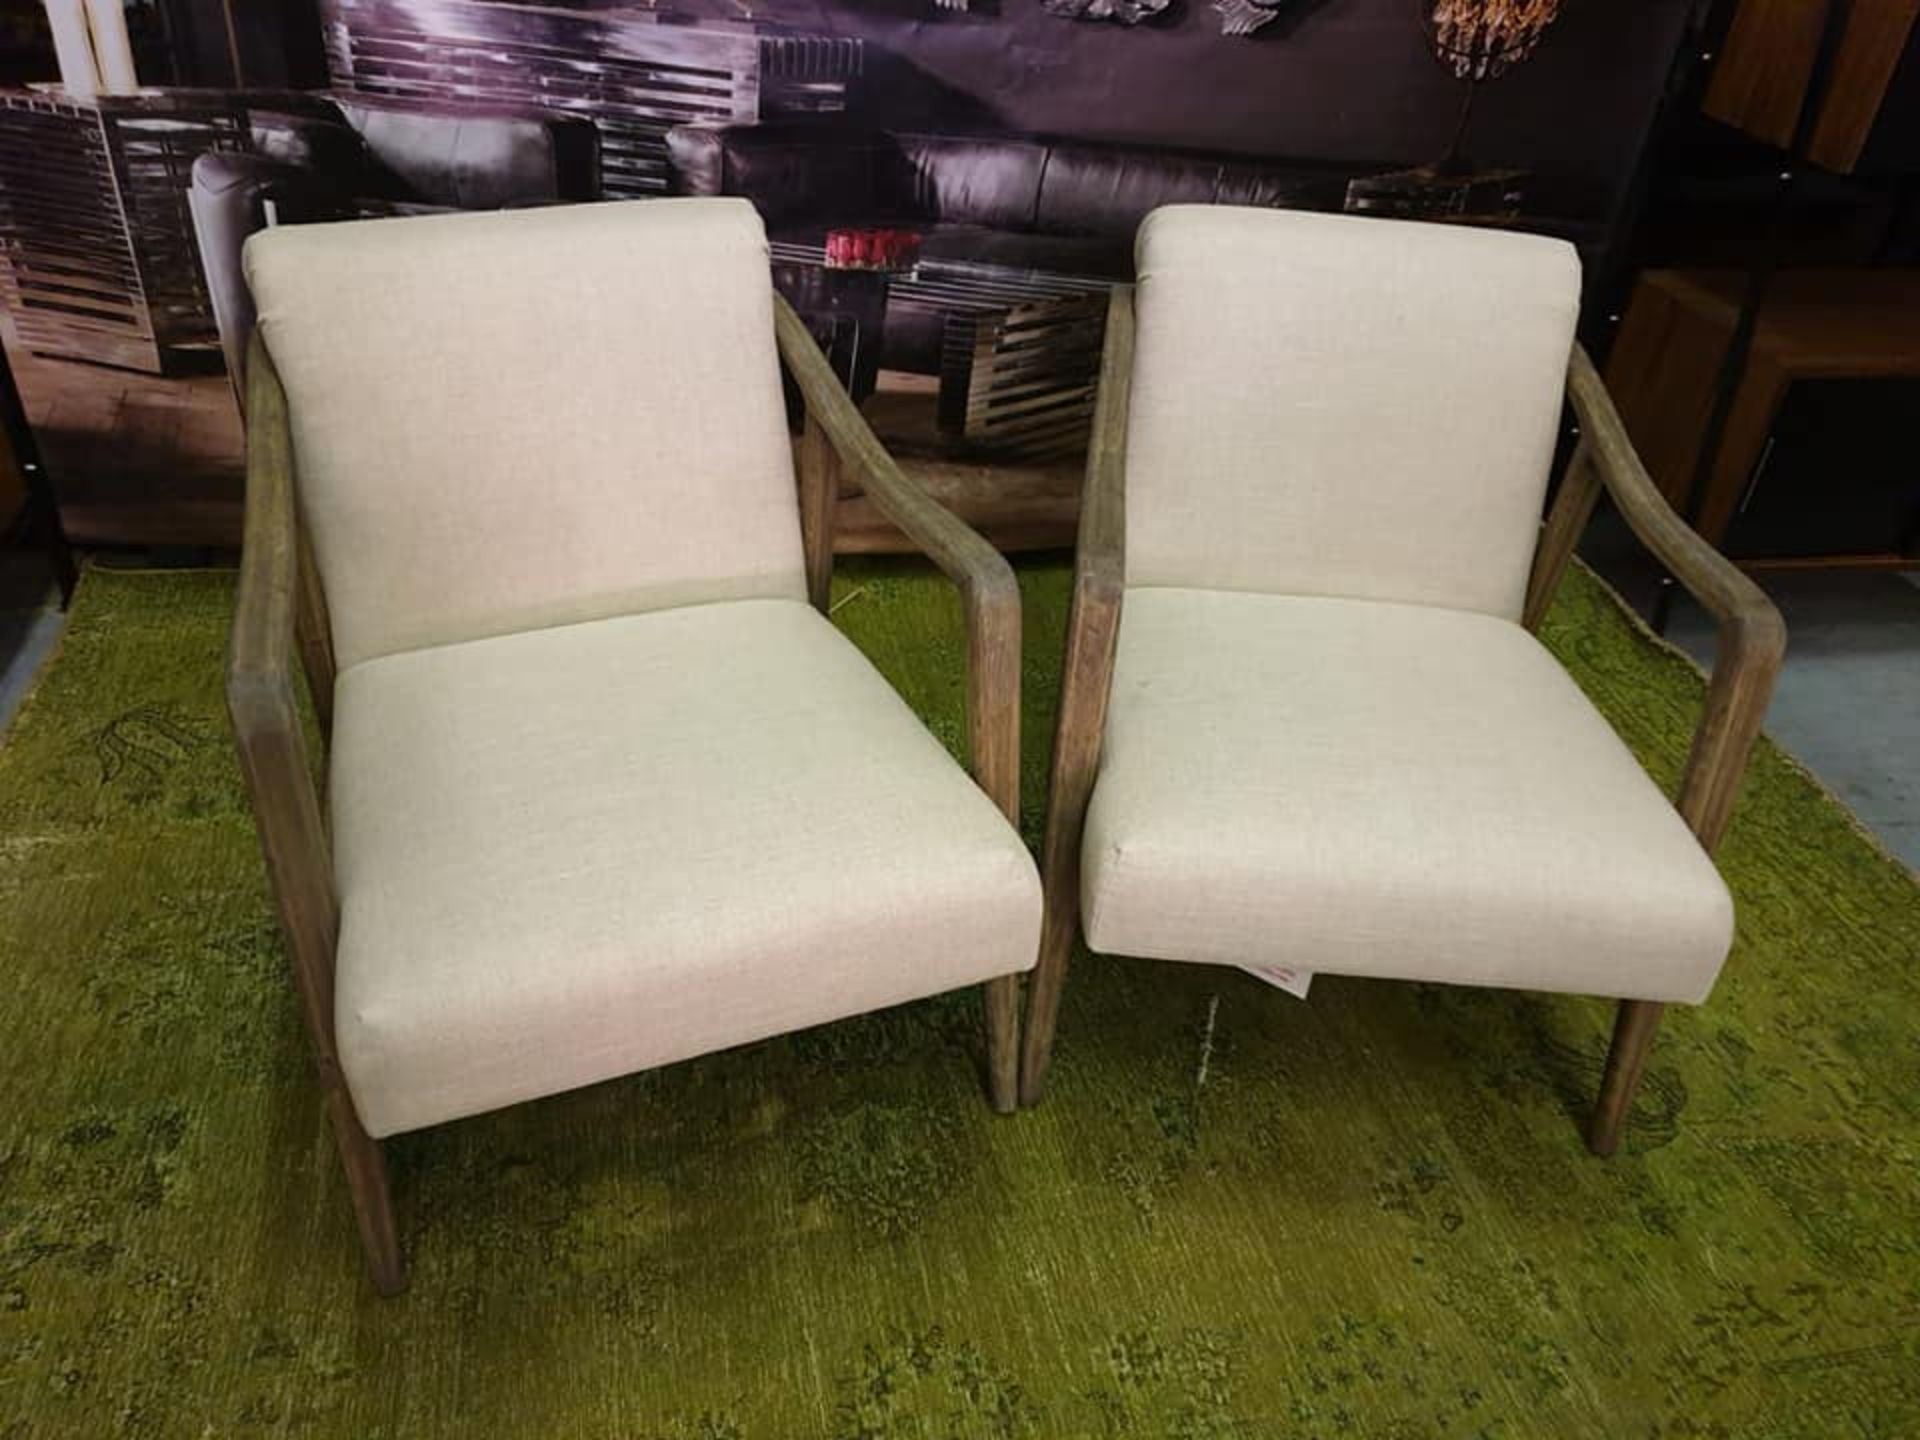 A pair of Alton Natural Ecru Linen Chairs The Alton chair is a classic and sophisticated weathered - Image 2 of 5